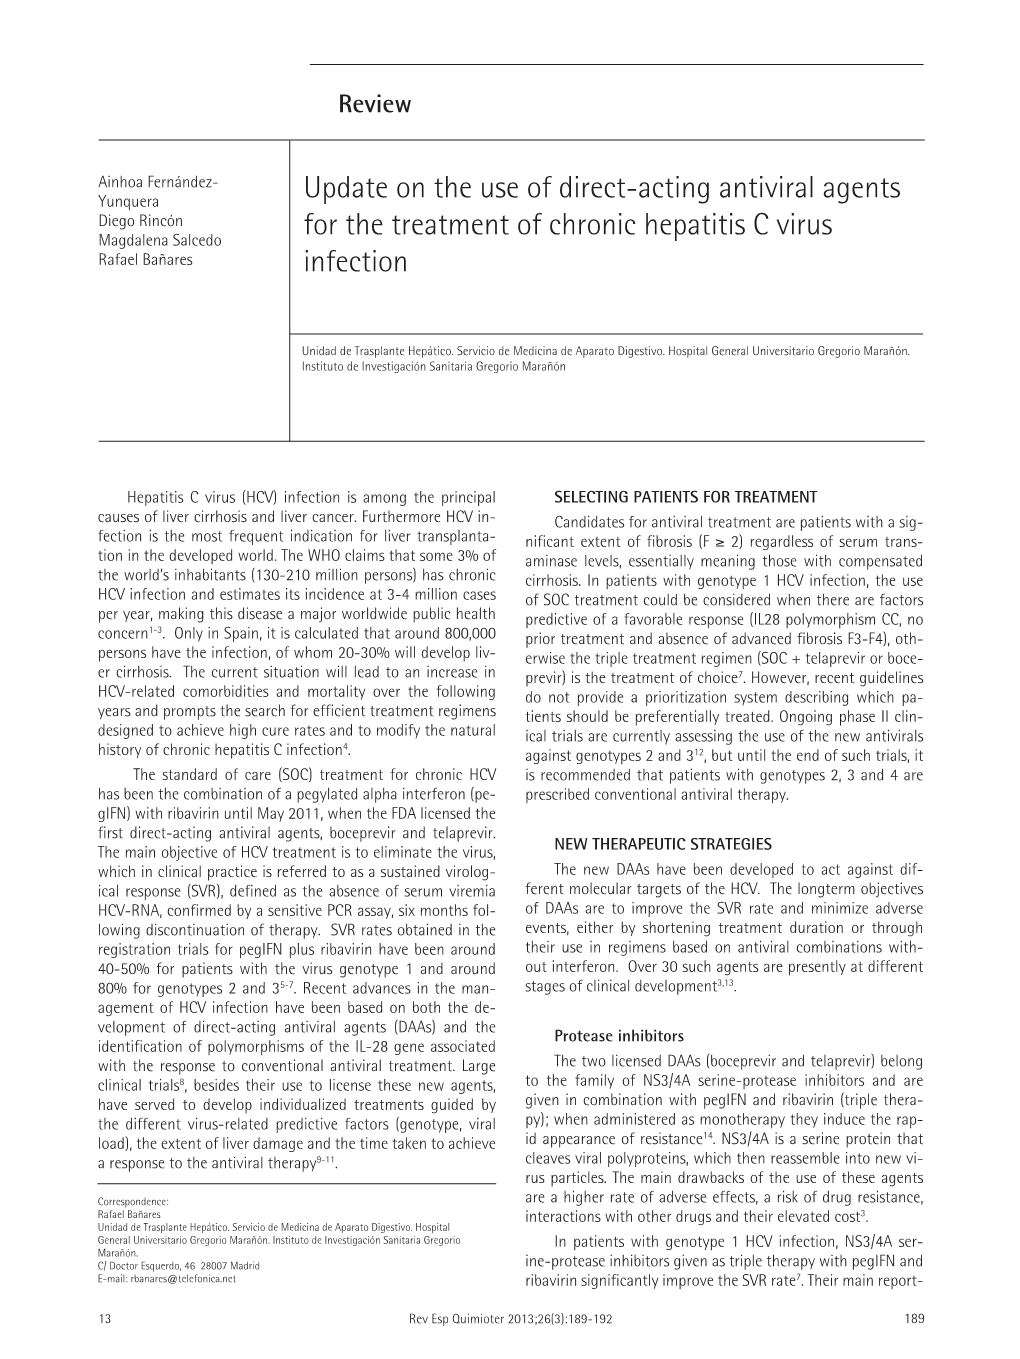 Update on the Use of Direct-Acting Antiviral Agents for the Treatment of Chronic Hepatitis C Virus Infection